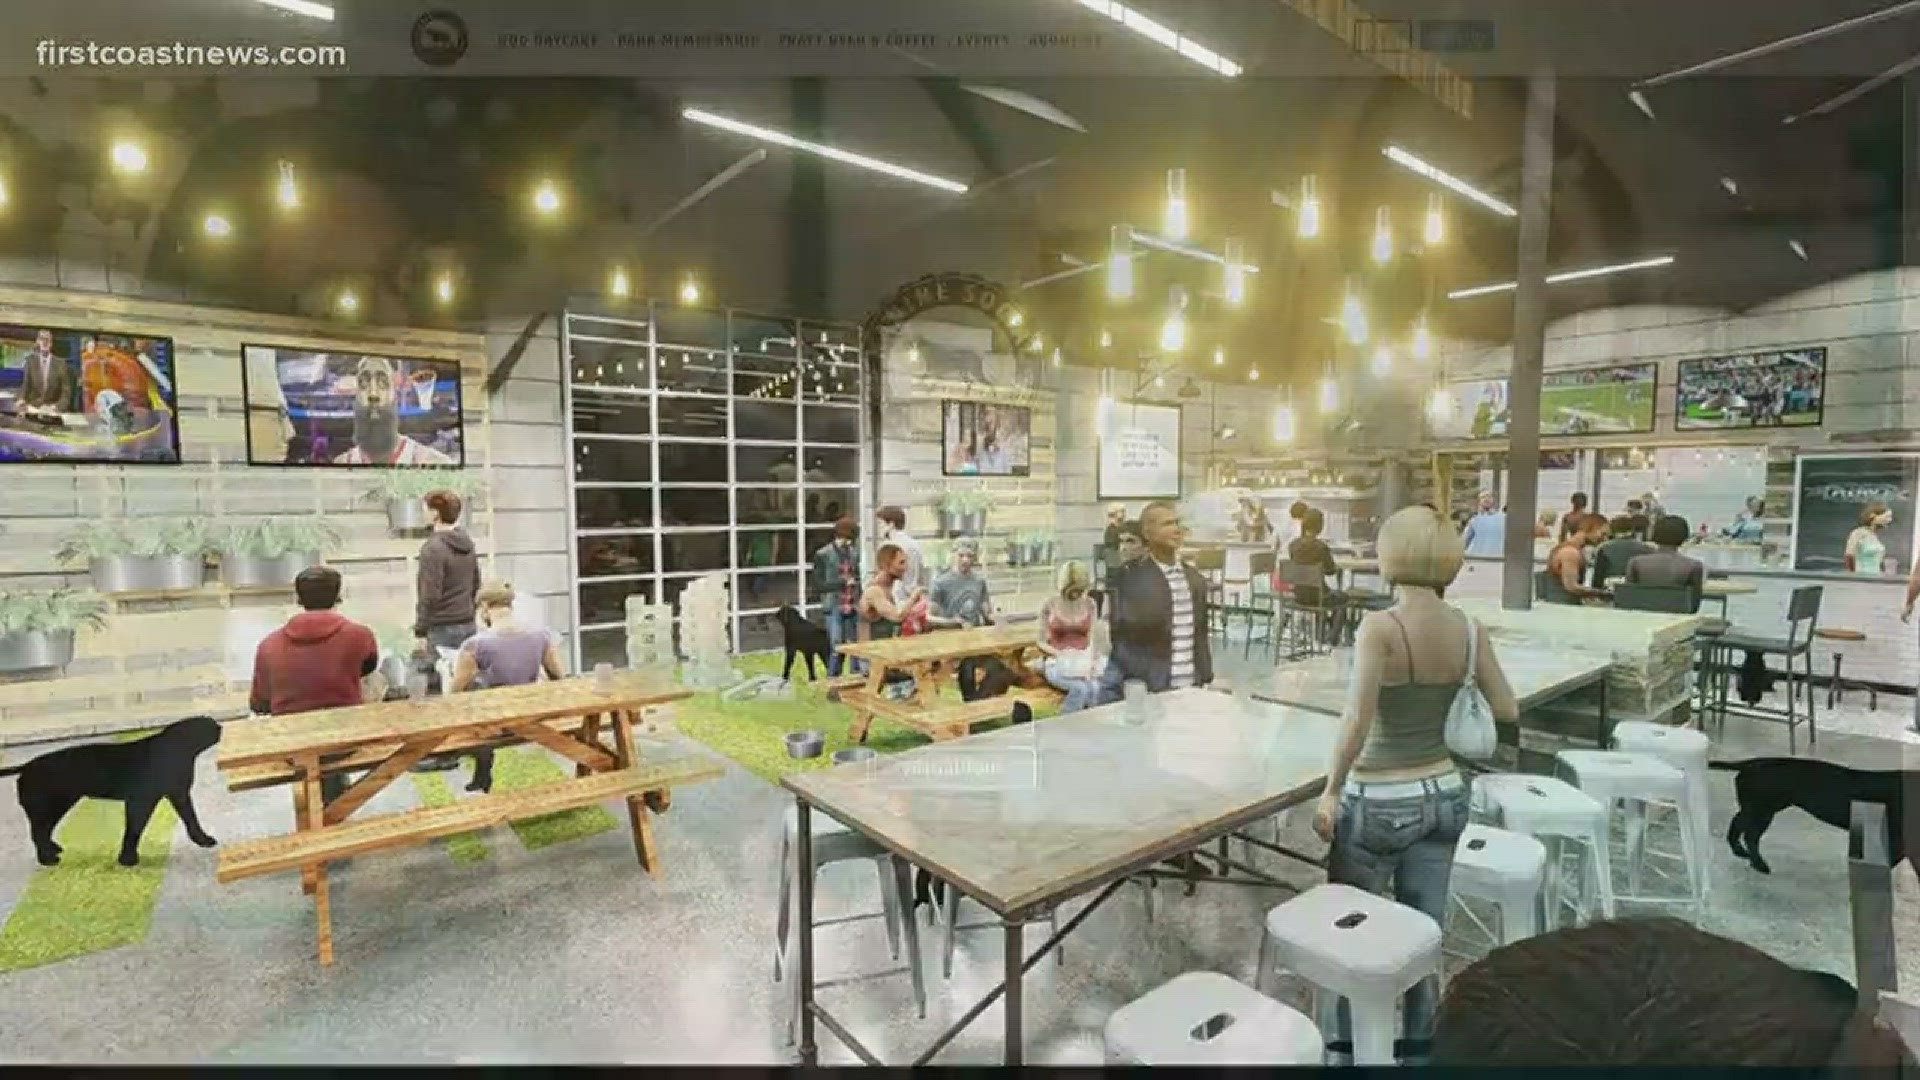 Jacksonville to get its first dog park with beer and coffee bar